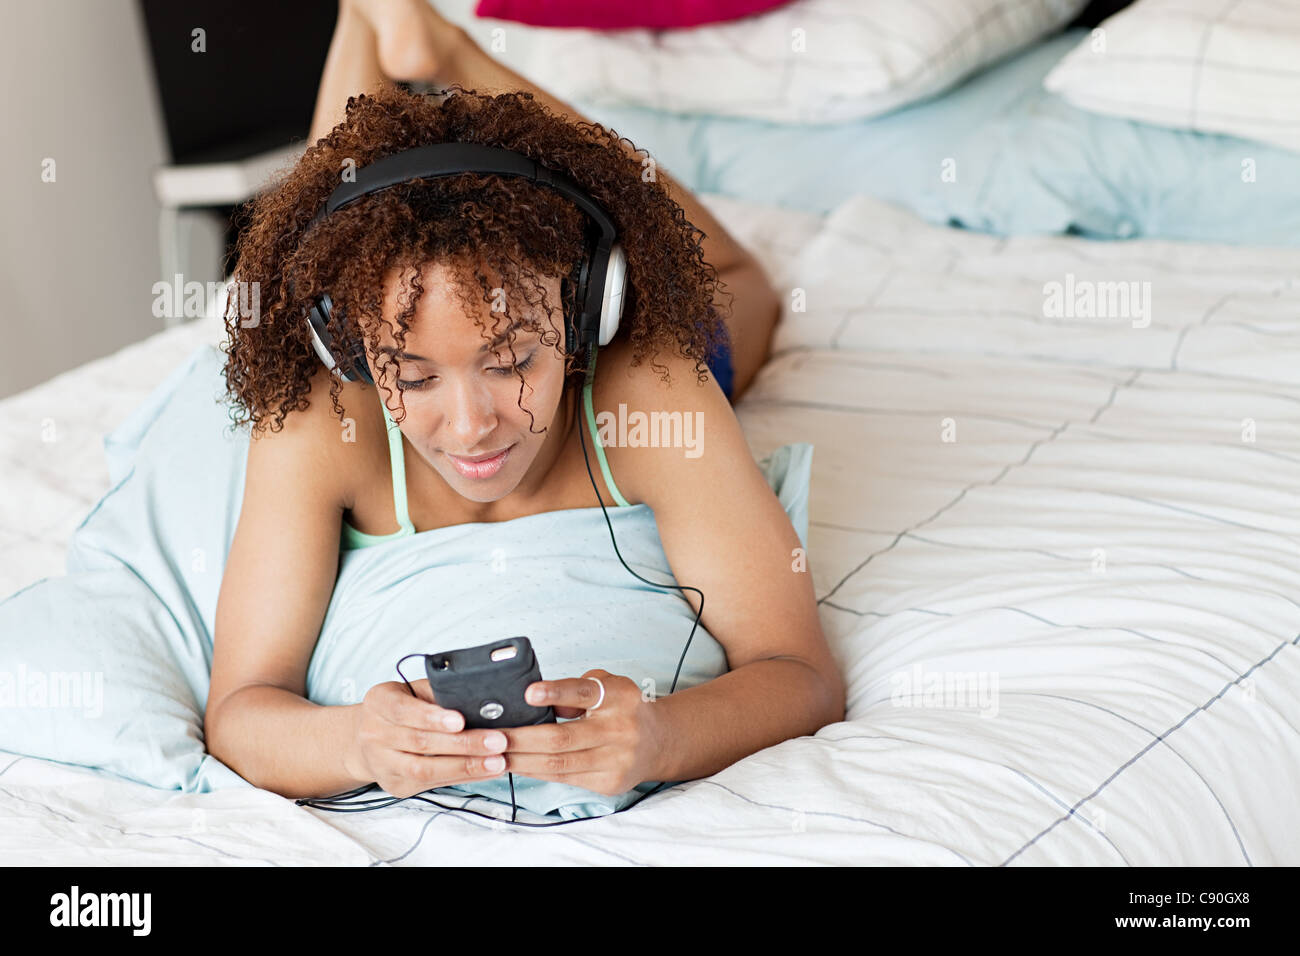 Woman listening to music on mp3 player Stock Photo